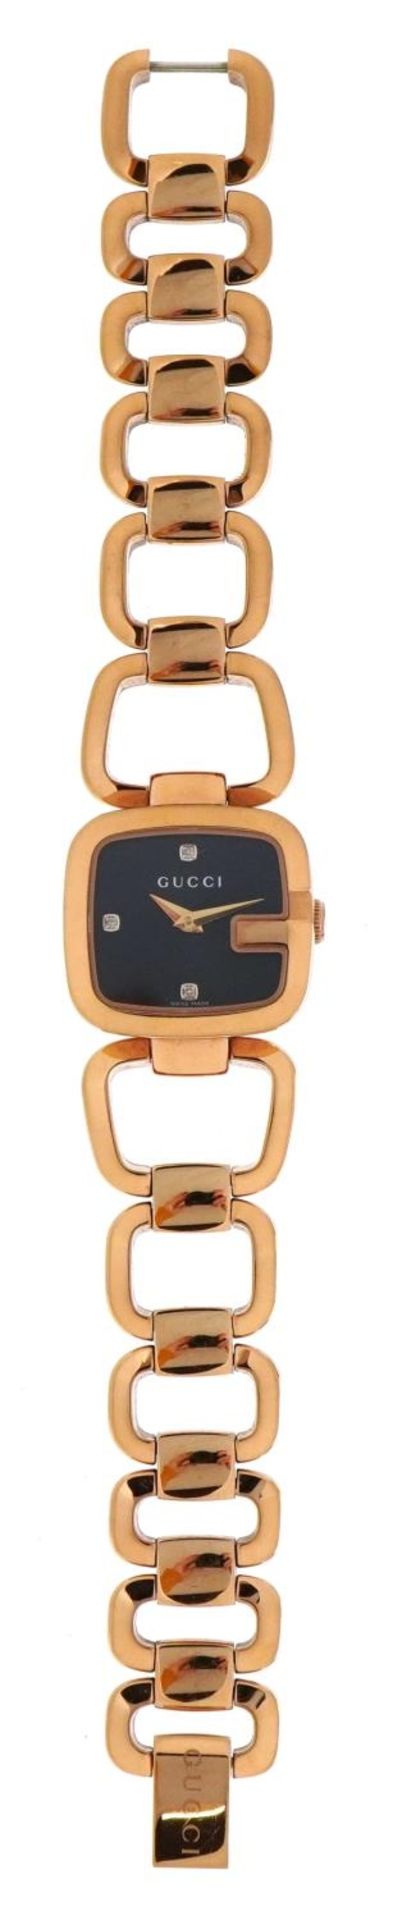 Gucci, ladies Gucci Dial G wristwatch numbered 125.5 with spare link and box, the case 24mm wide - Image 2 of 8